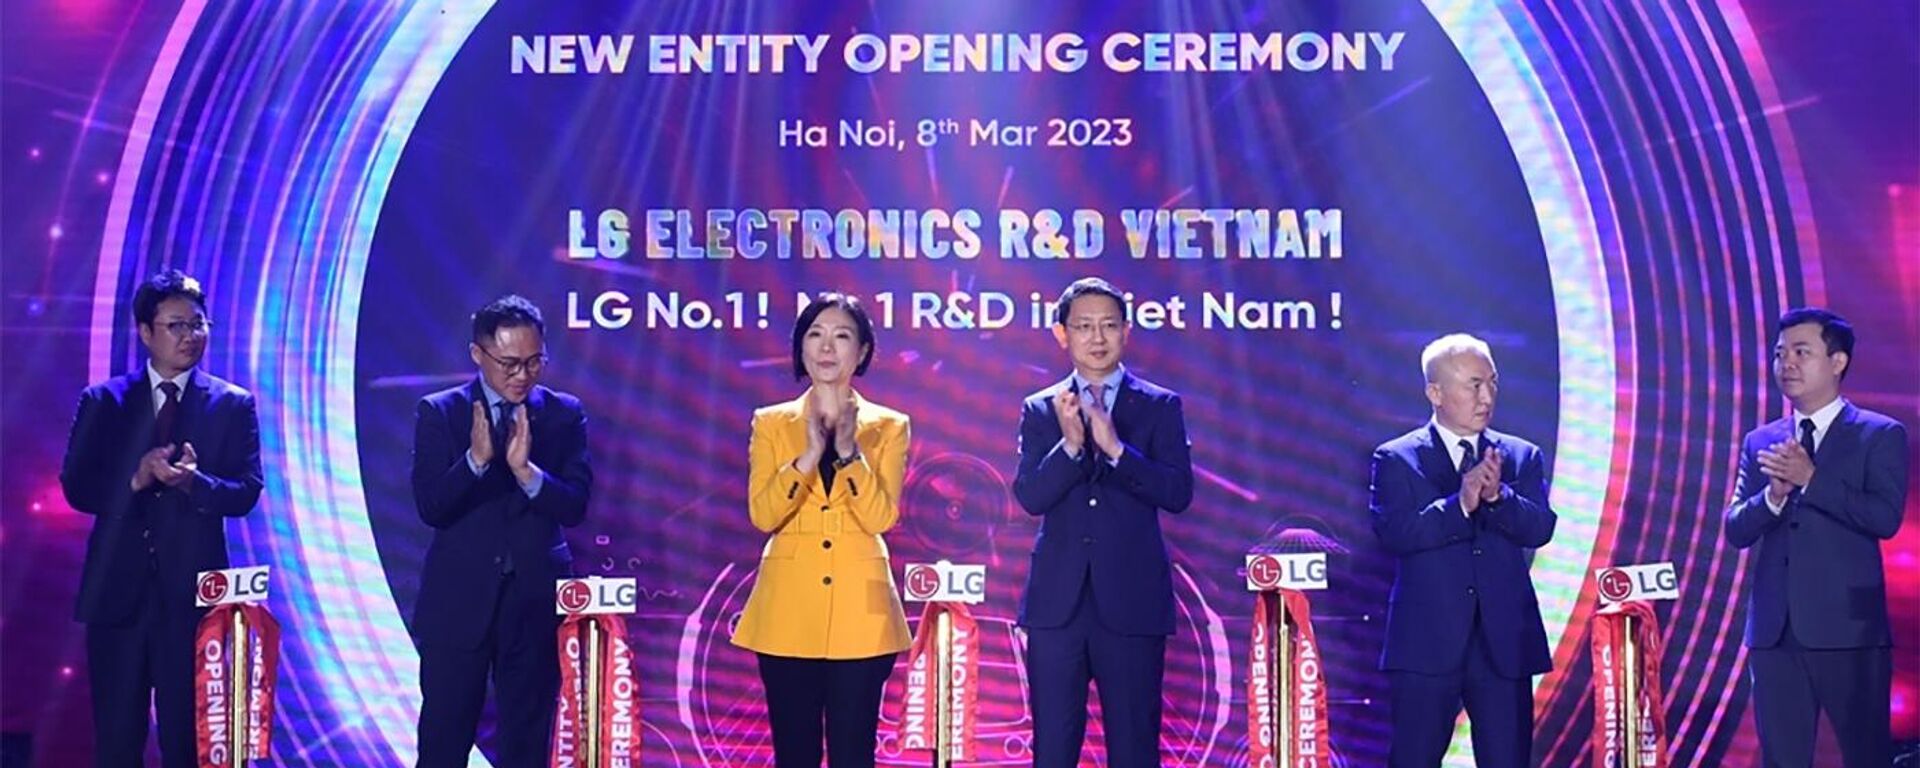 LG Electronics' senior officials and Korean Ambassador to Vietnam Oh Young-joo (third from left) attend the opening ceremony of LG Electronics Development Vietnam, the tech giant's new automotive R&D unit, in Hanoi, Vietnam on Wednesday.  - Sputnik Việt Nam, 1920, 09.03.2023